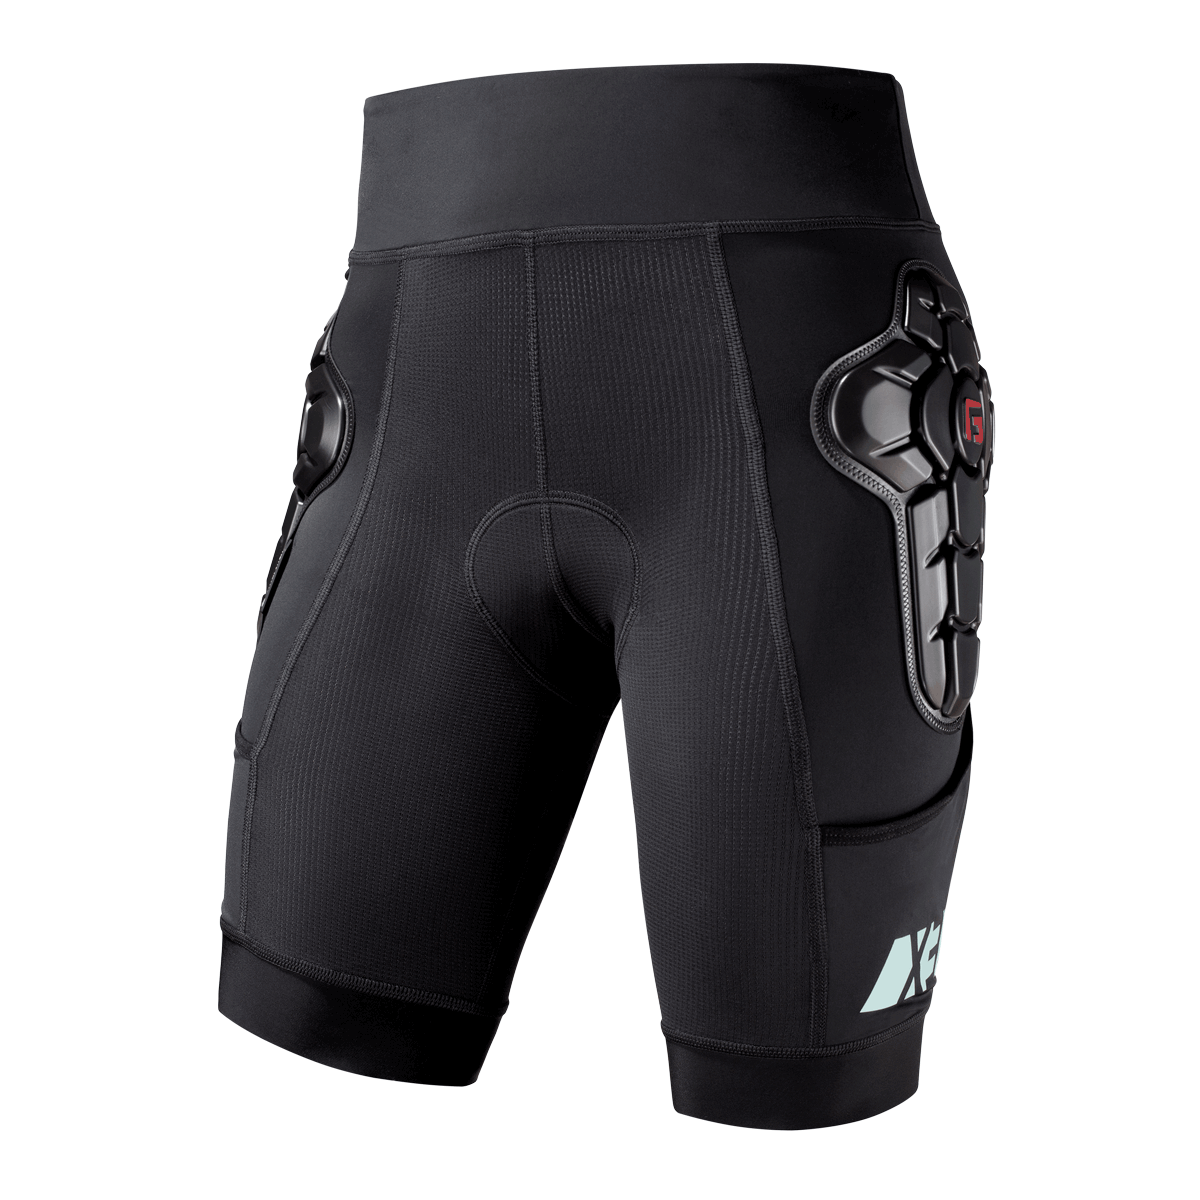 Pro-X3 Youth Adult Women Compression Padded shorts Liner Mountain Biking Ski Snowboard, protection and compression shorts 